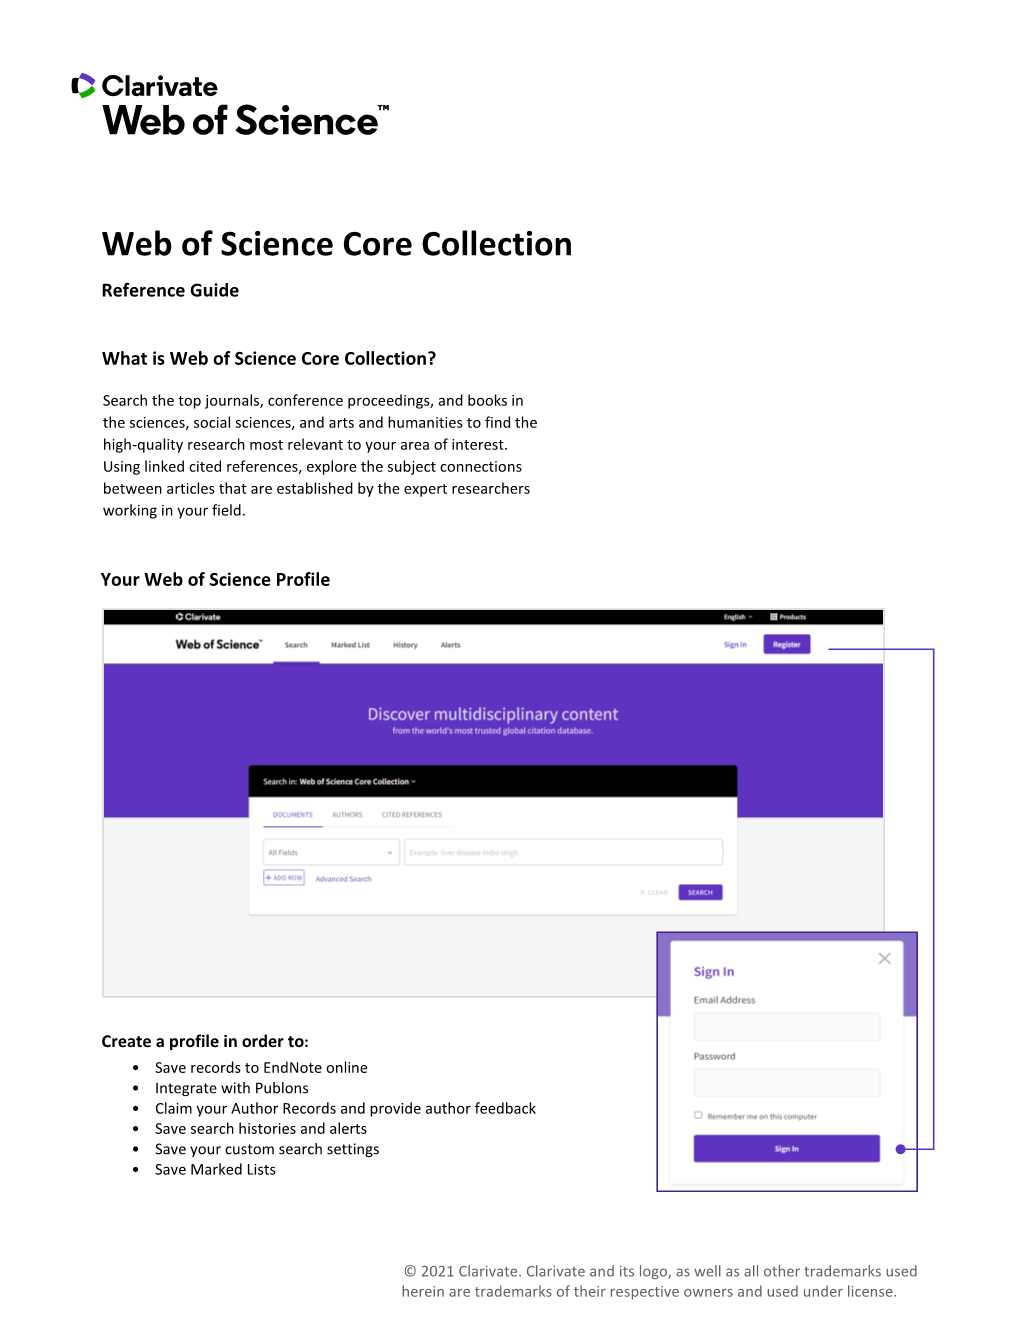 Web of Science Core Collection Reference Guide